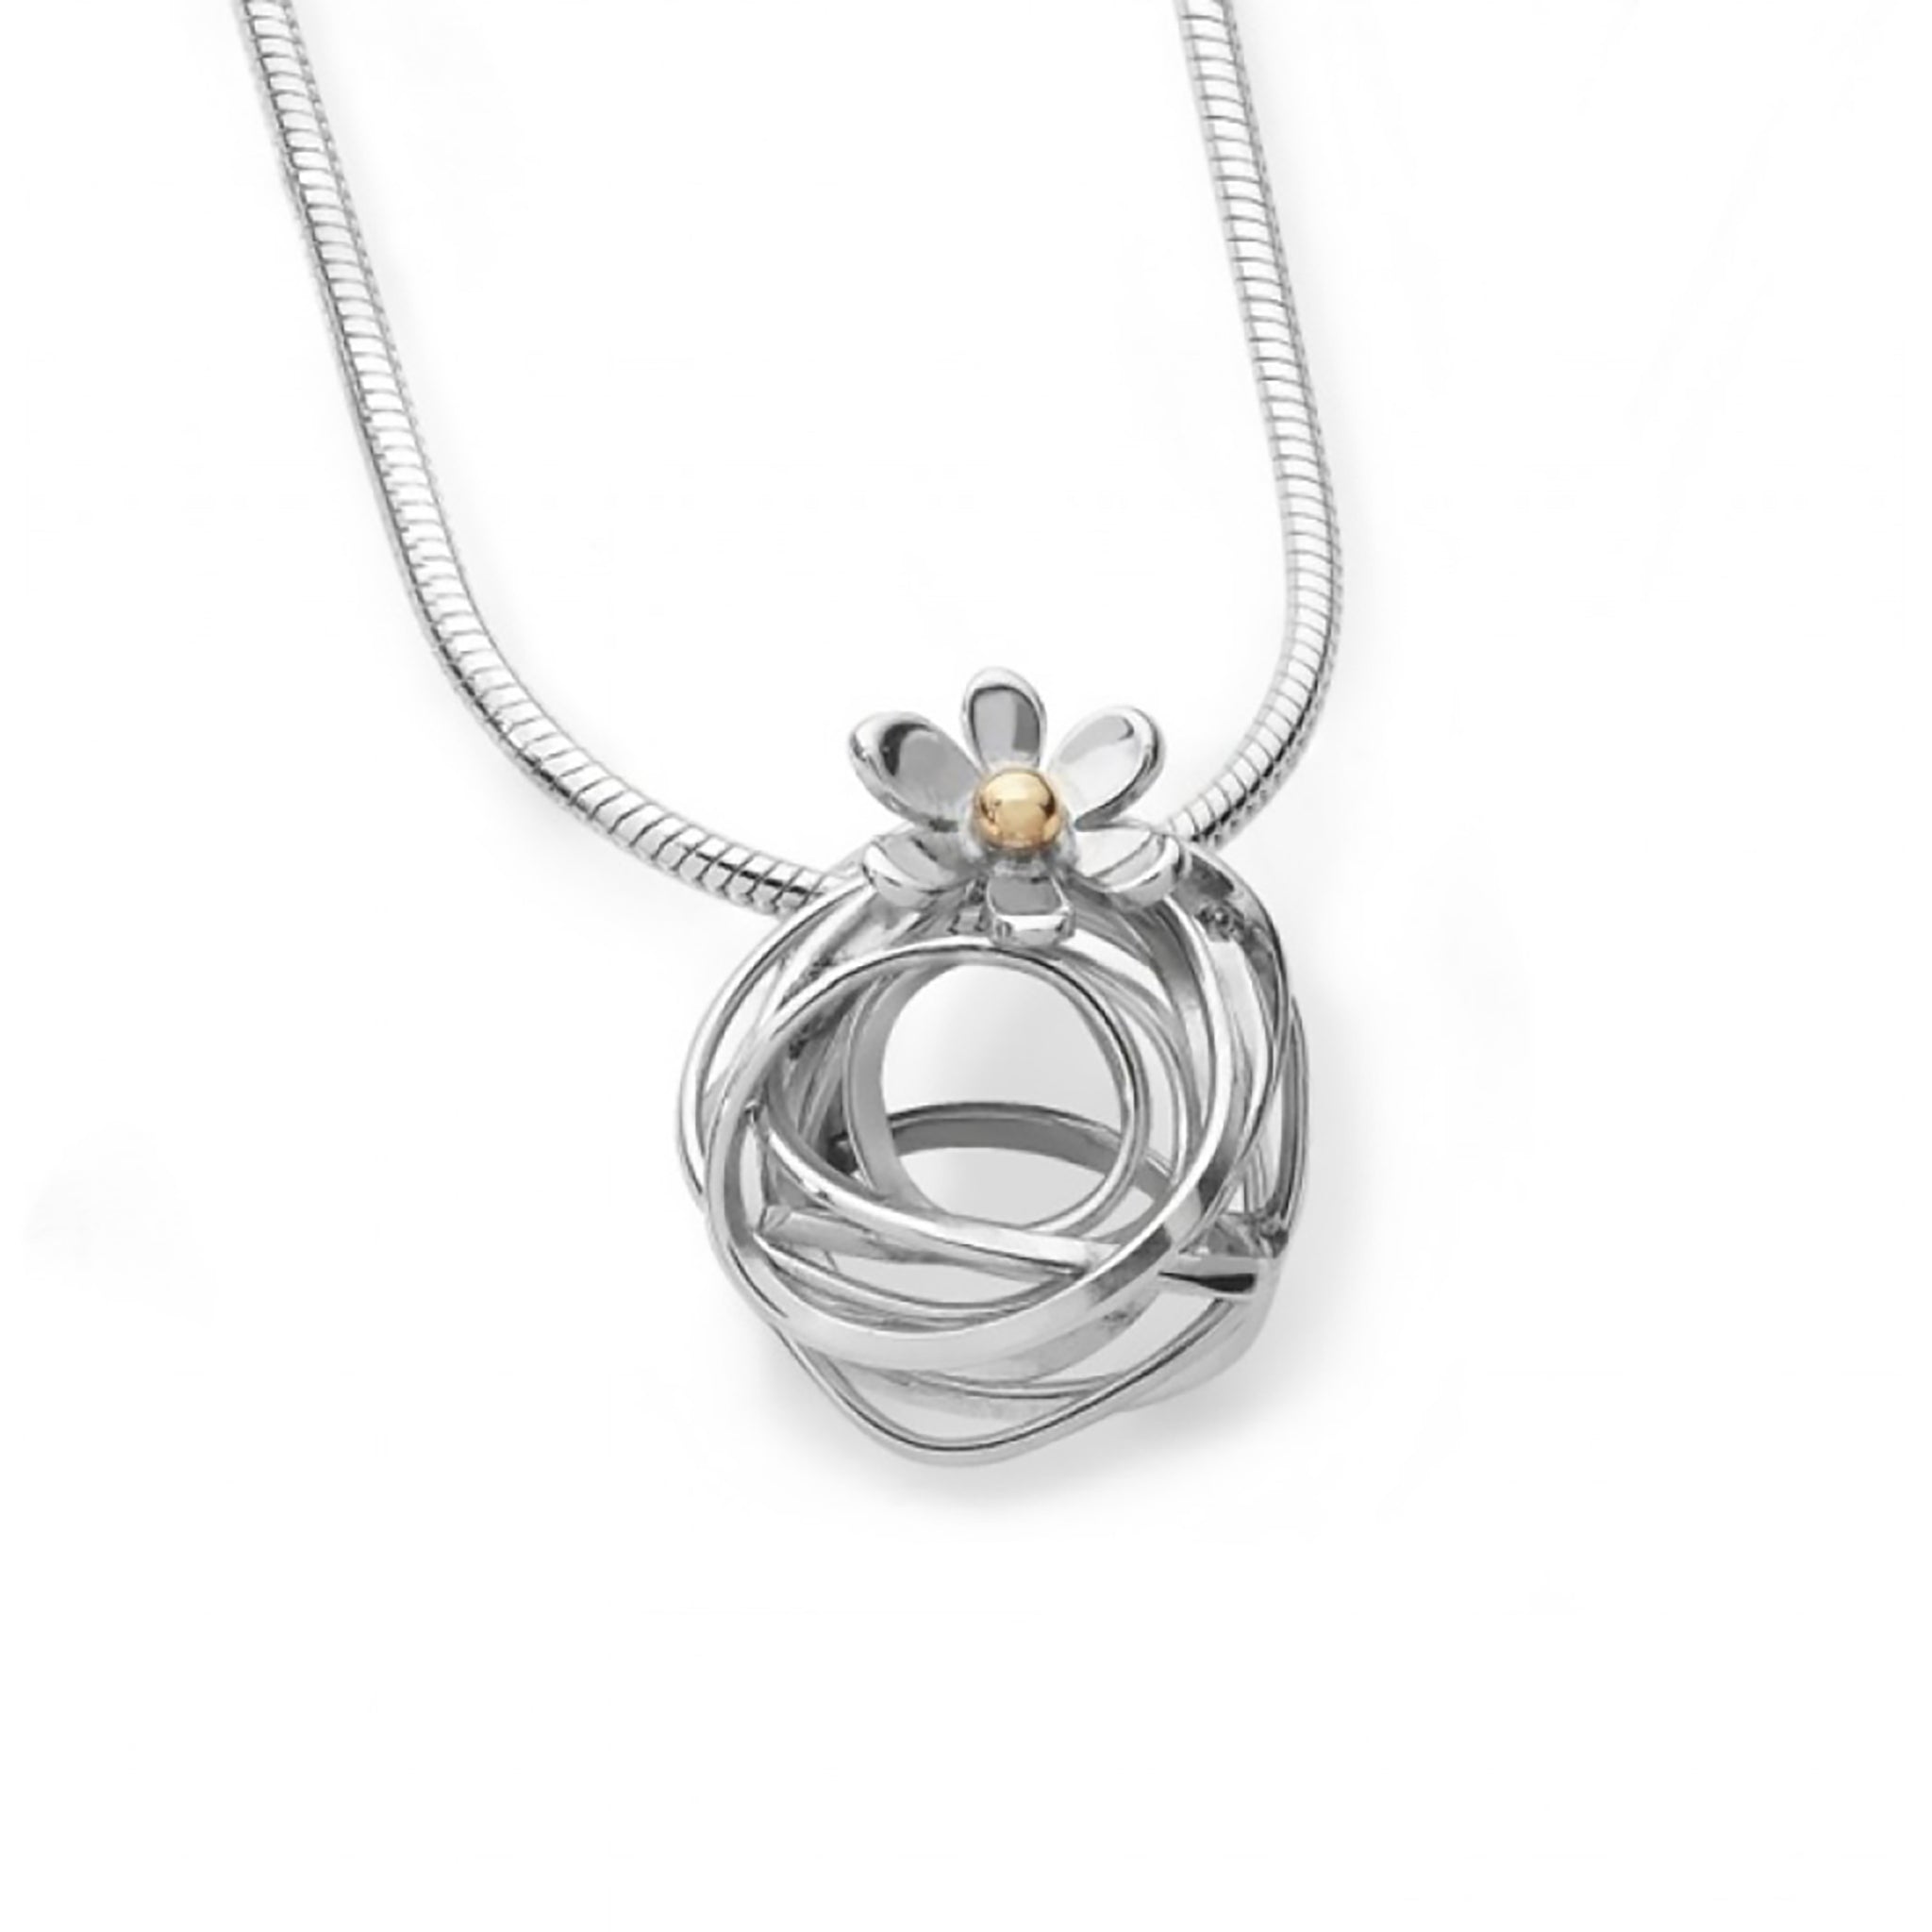 Silver pendant with scribble silver tangle design and flower detail with gold centre on silver snake chain